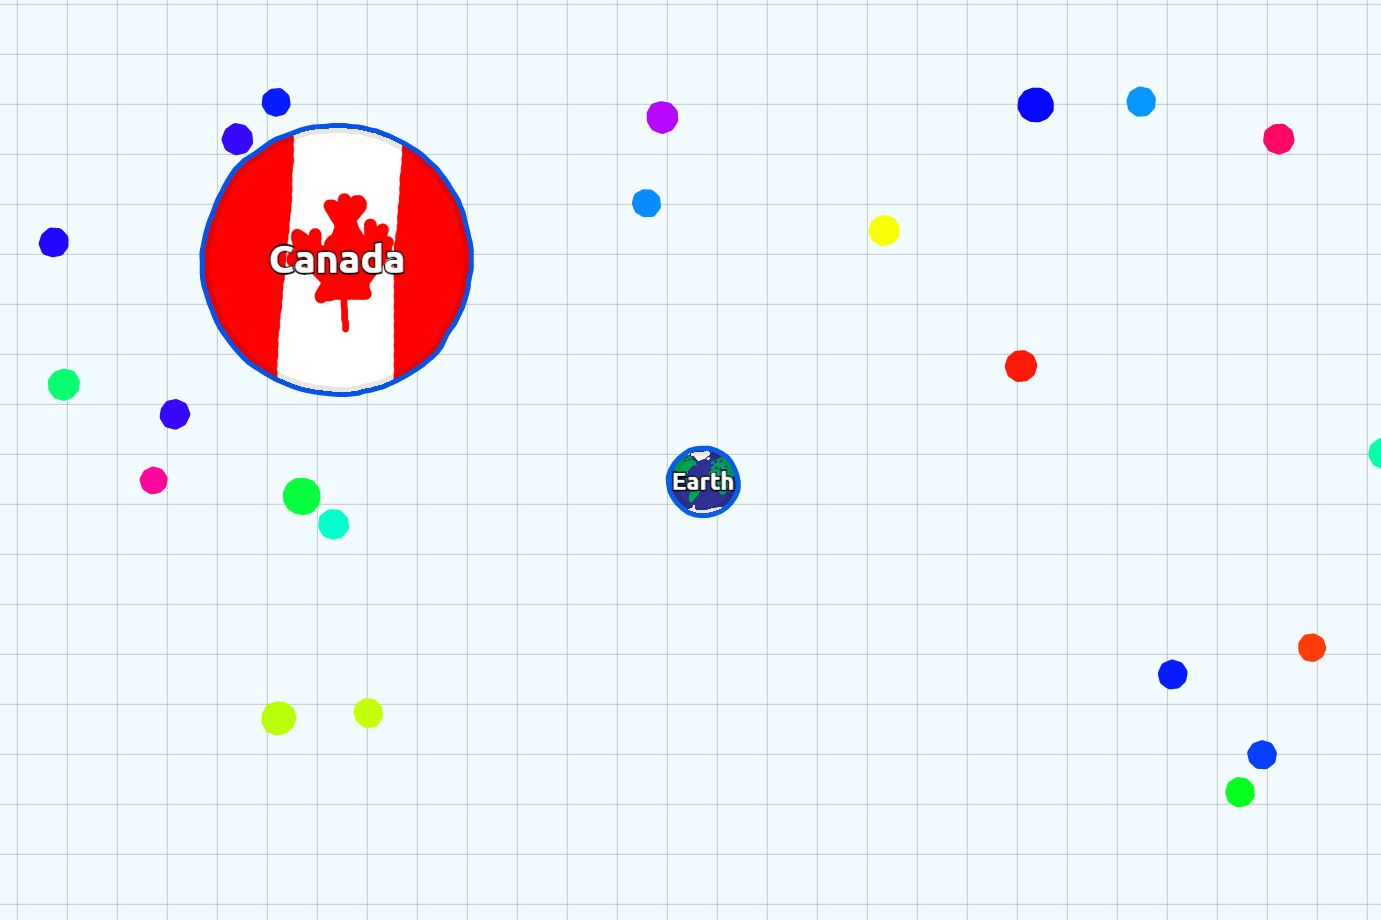 Agar.io HD Wallpapers and Backgrounds